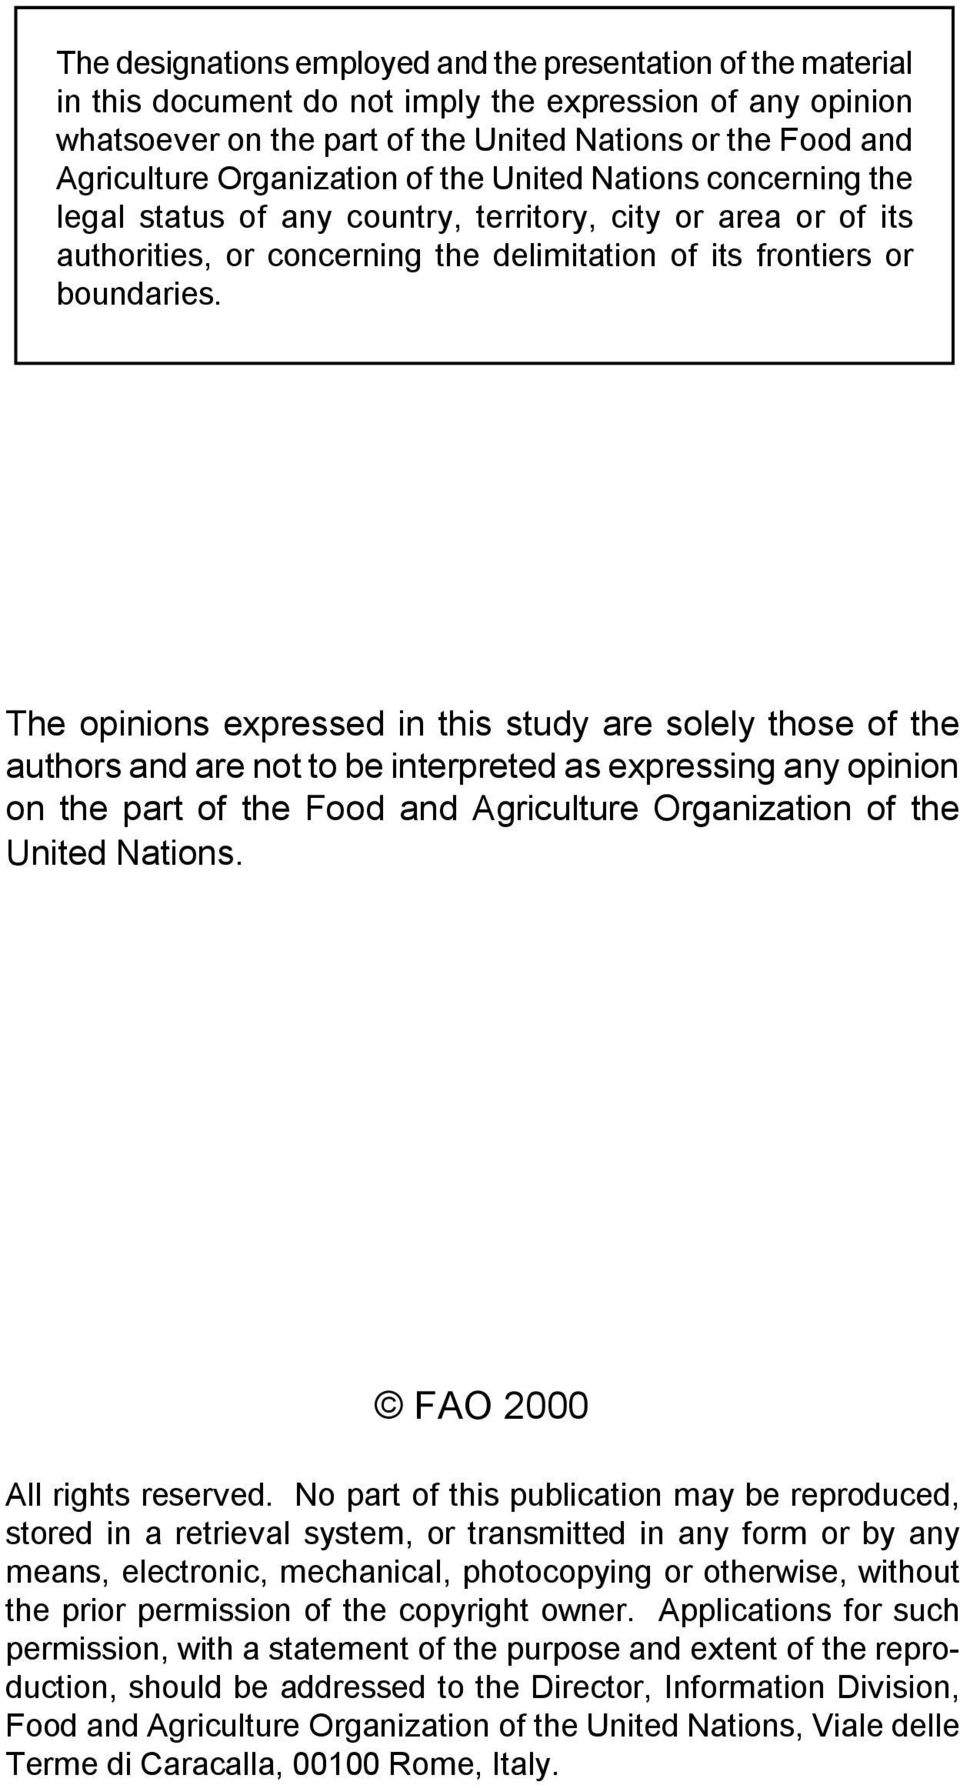 The opinions expressed in this study are solely those of the authors and are not to be interpreted as expressing any opinion on the part of the Food and Agriculture Organization of the United Nations.